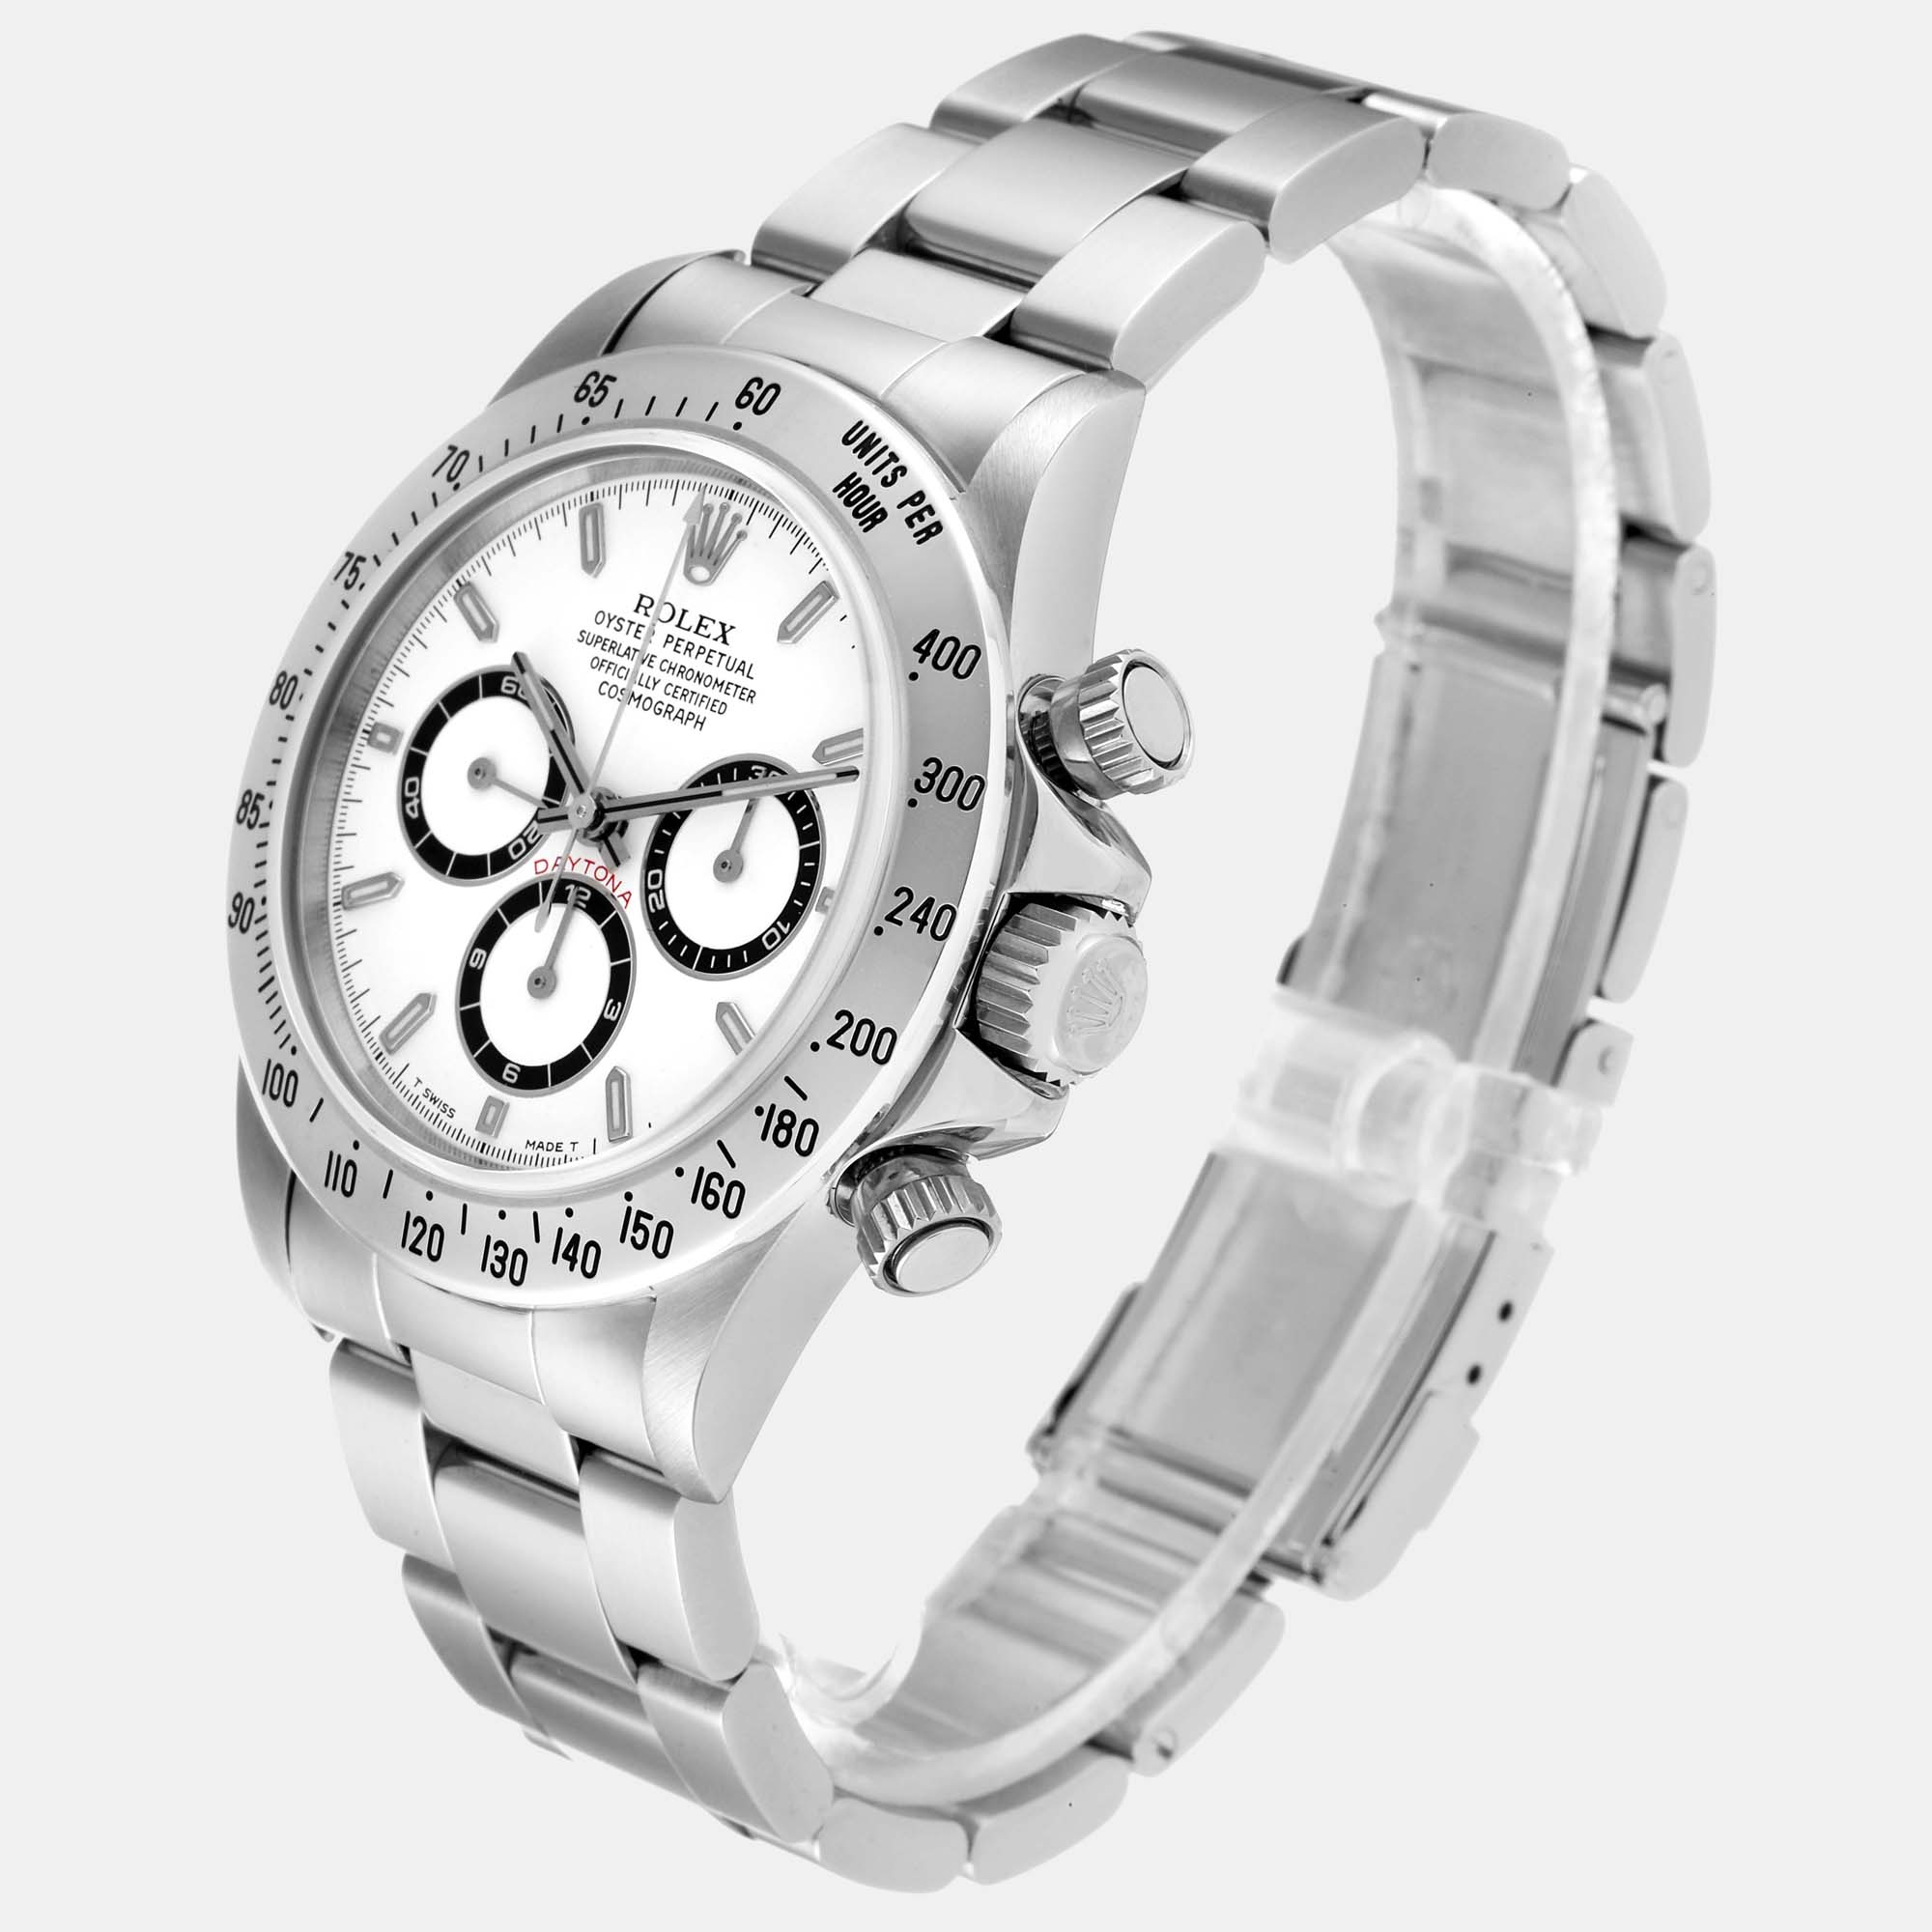 Rolex White Stainless Steel Cosmograph Daytona 116520 Automatic Men's Wristwatch 40 Mm